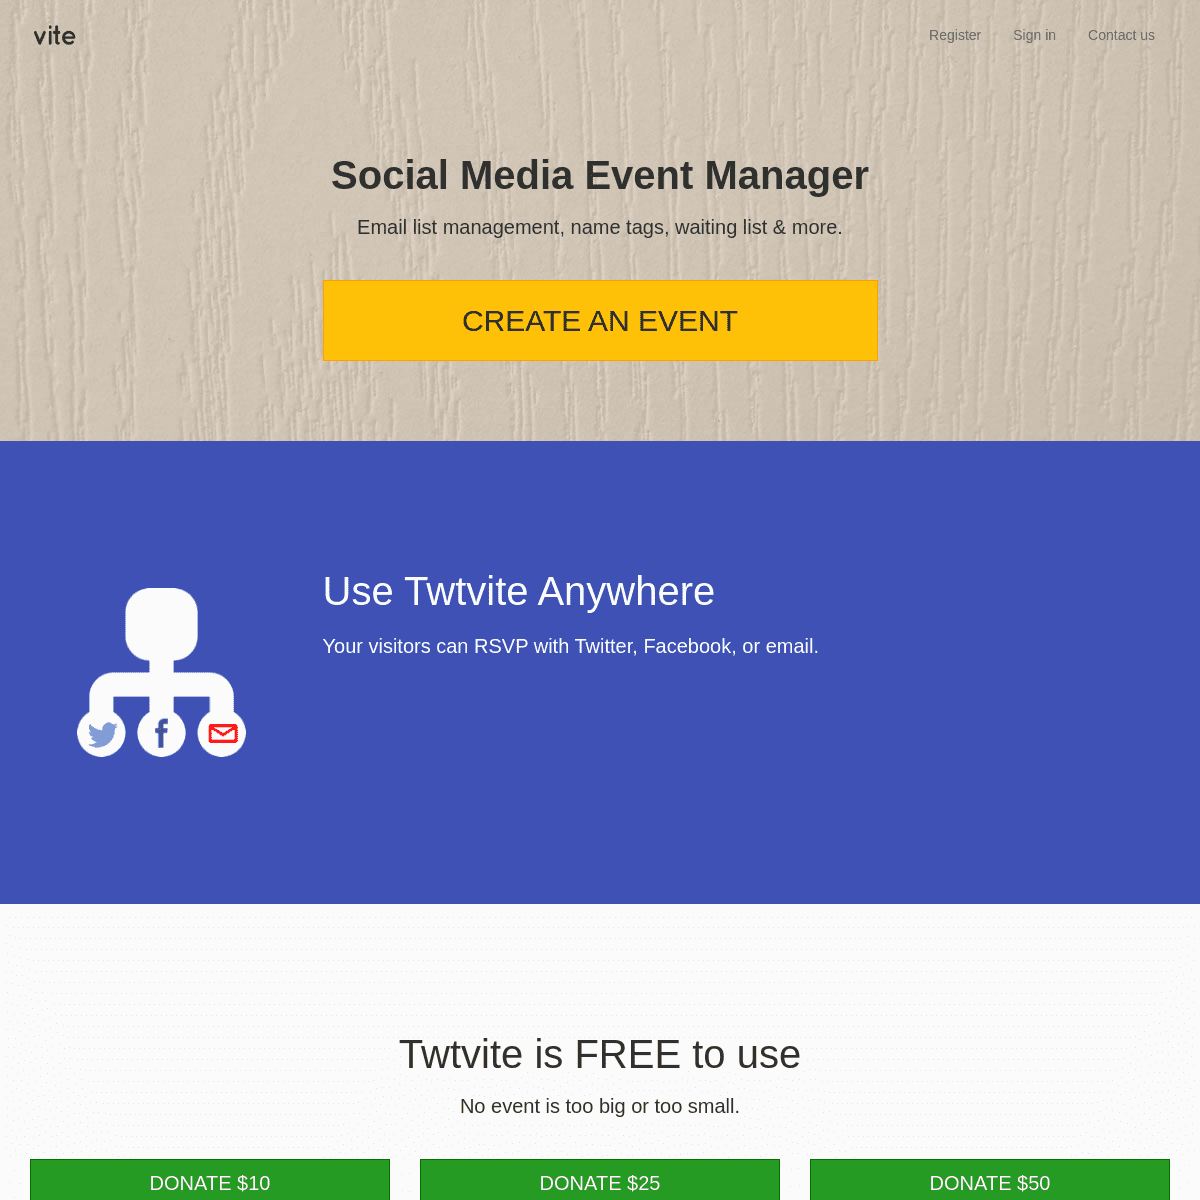 A complete backup of https://twtvite.com